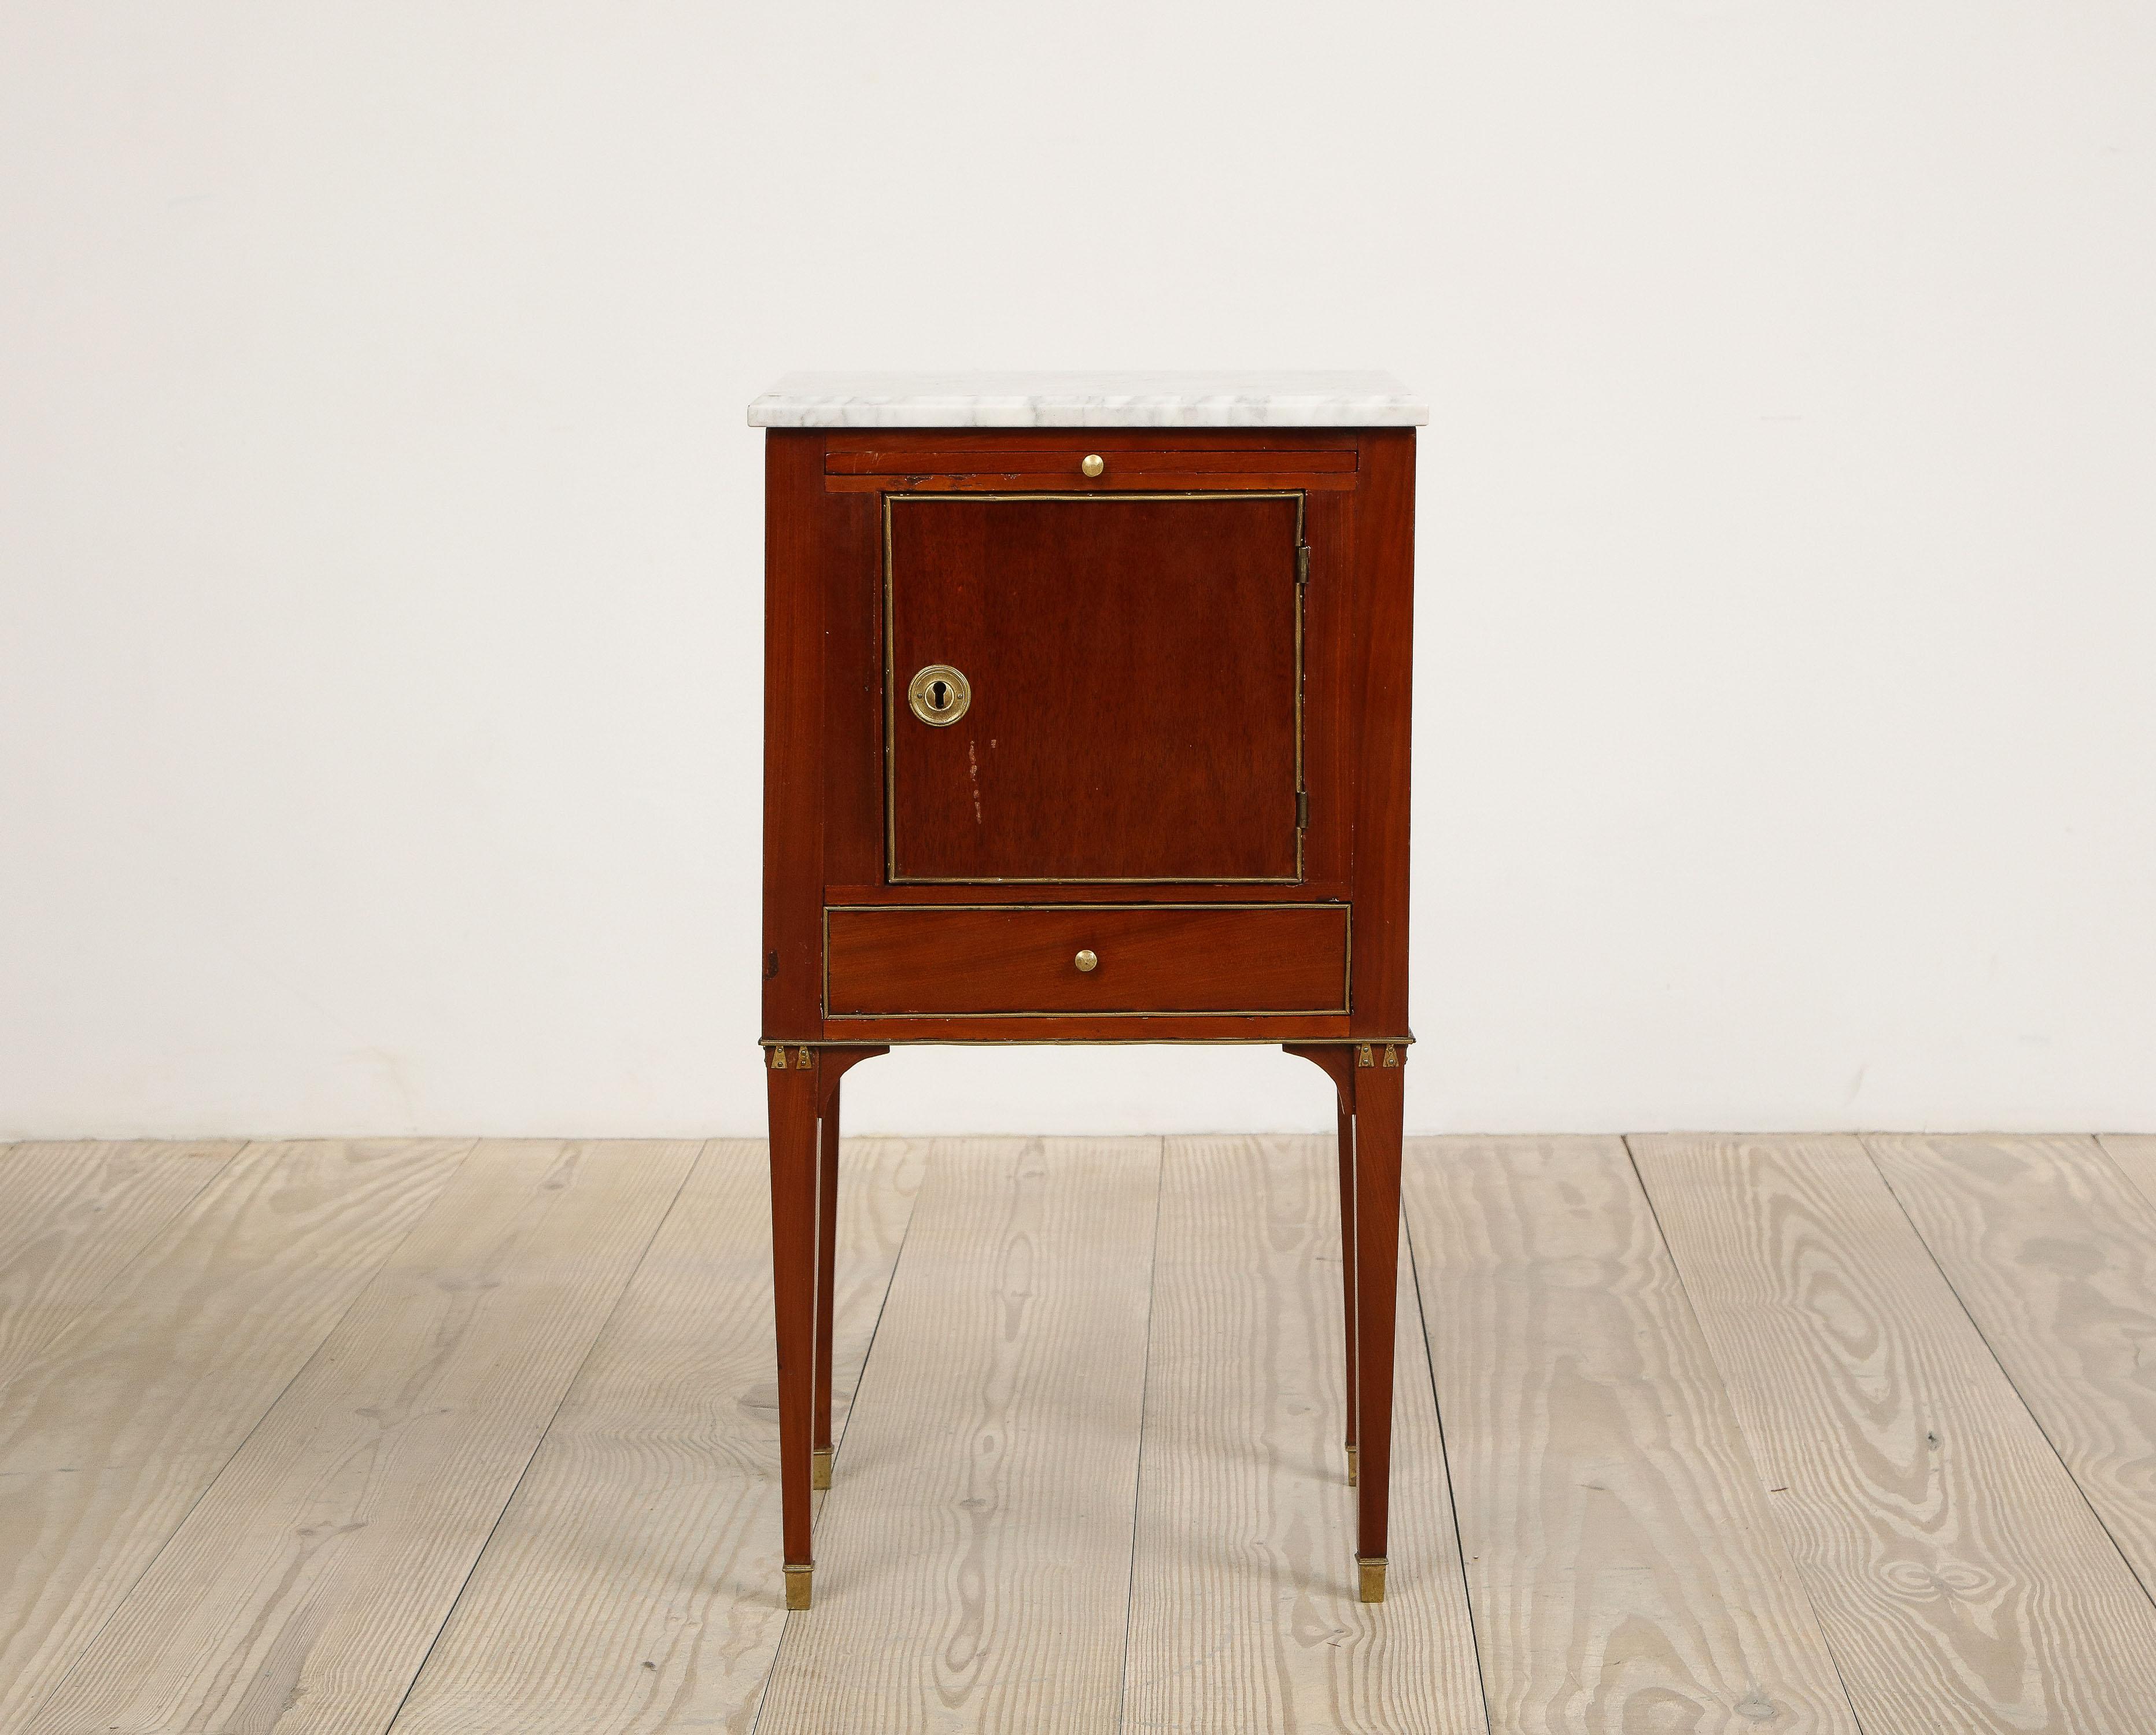 Beautiful Swedish mahogany Gustavian-style side table - cabinet with original marble top, circa 1850, origin: Sweden 

Pullout candle rest /writing surface, single door above single drawer with brass beaded fronts and beaded skirt. Square tapered